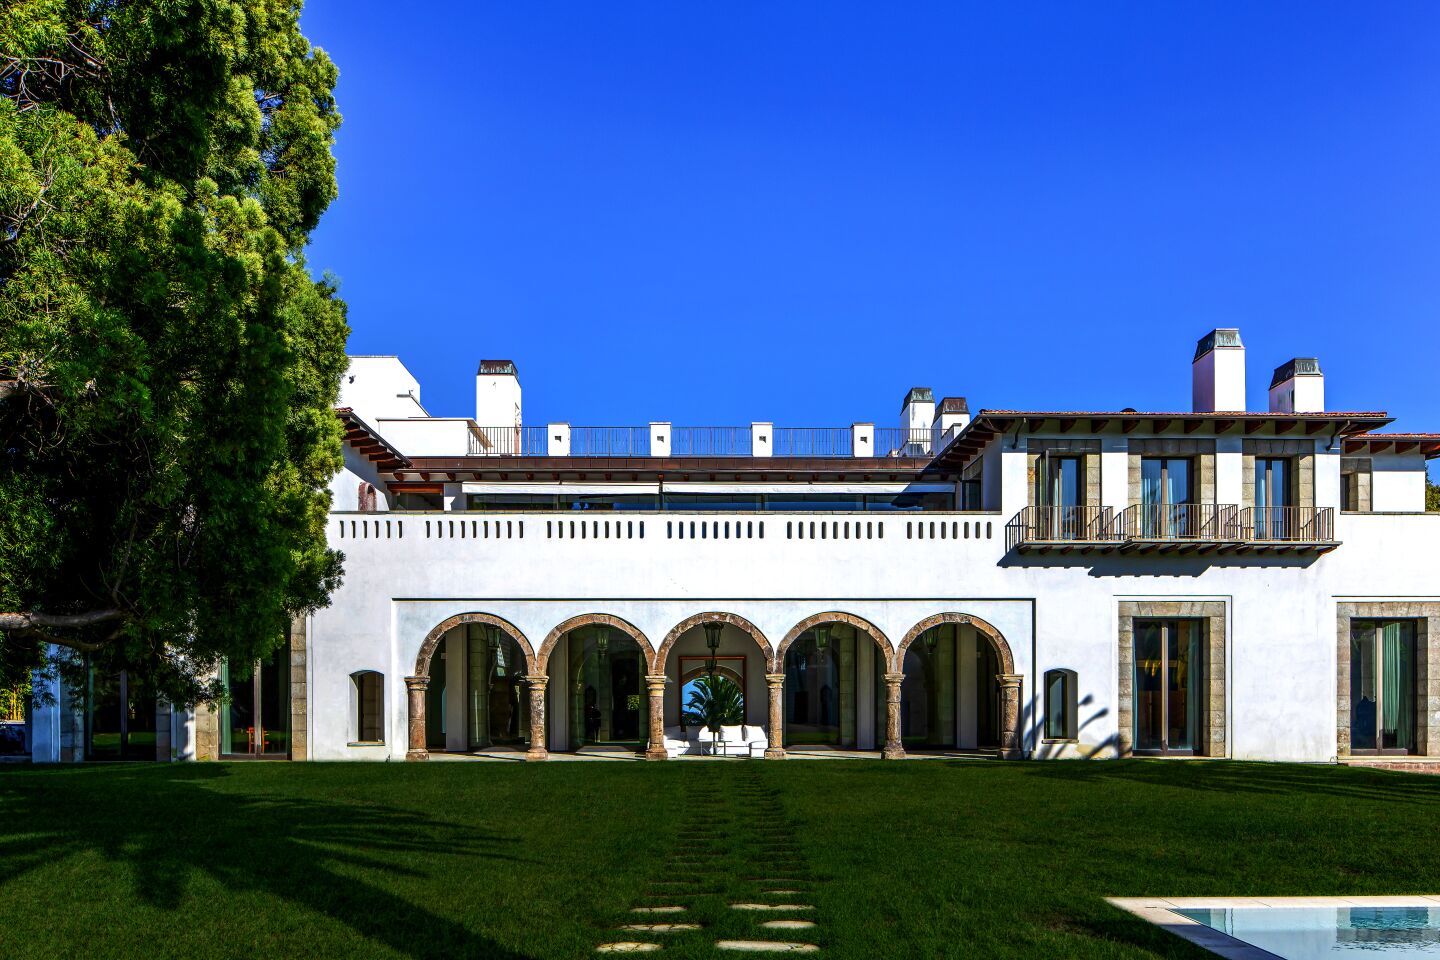 Fashion designer Eva Chow has relisted her museum-like mansion in Holmby Hills for sale at $69.975, down from $78 million last year.